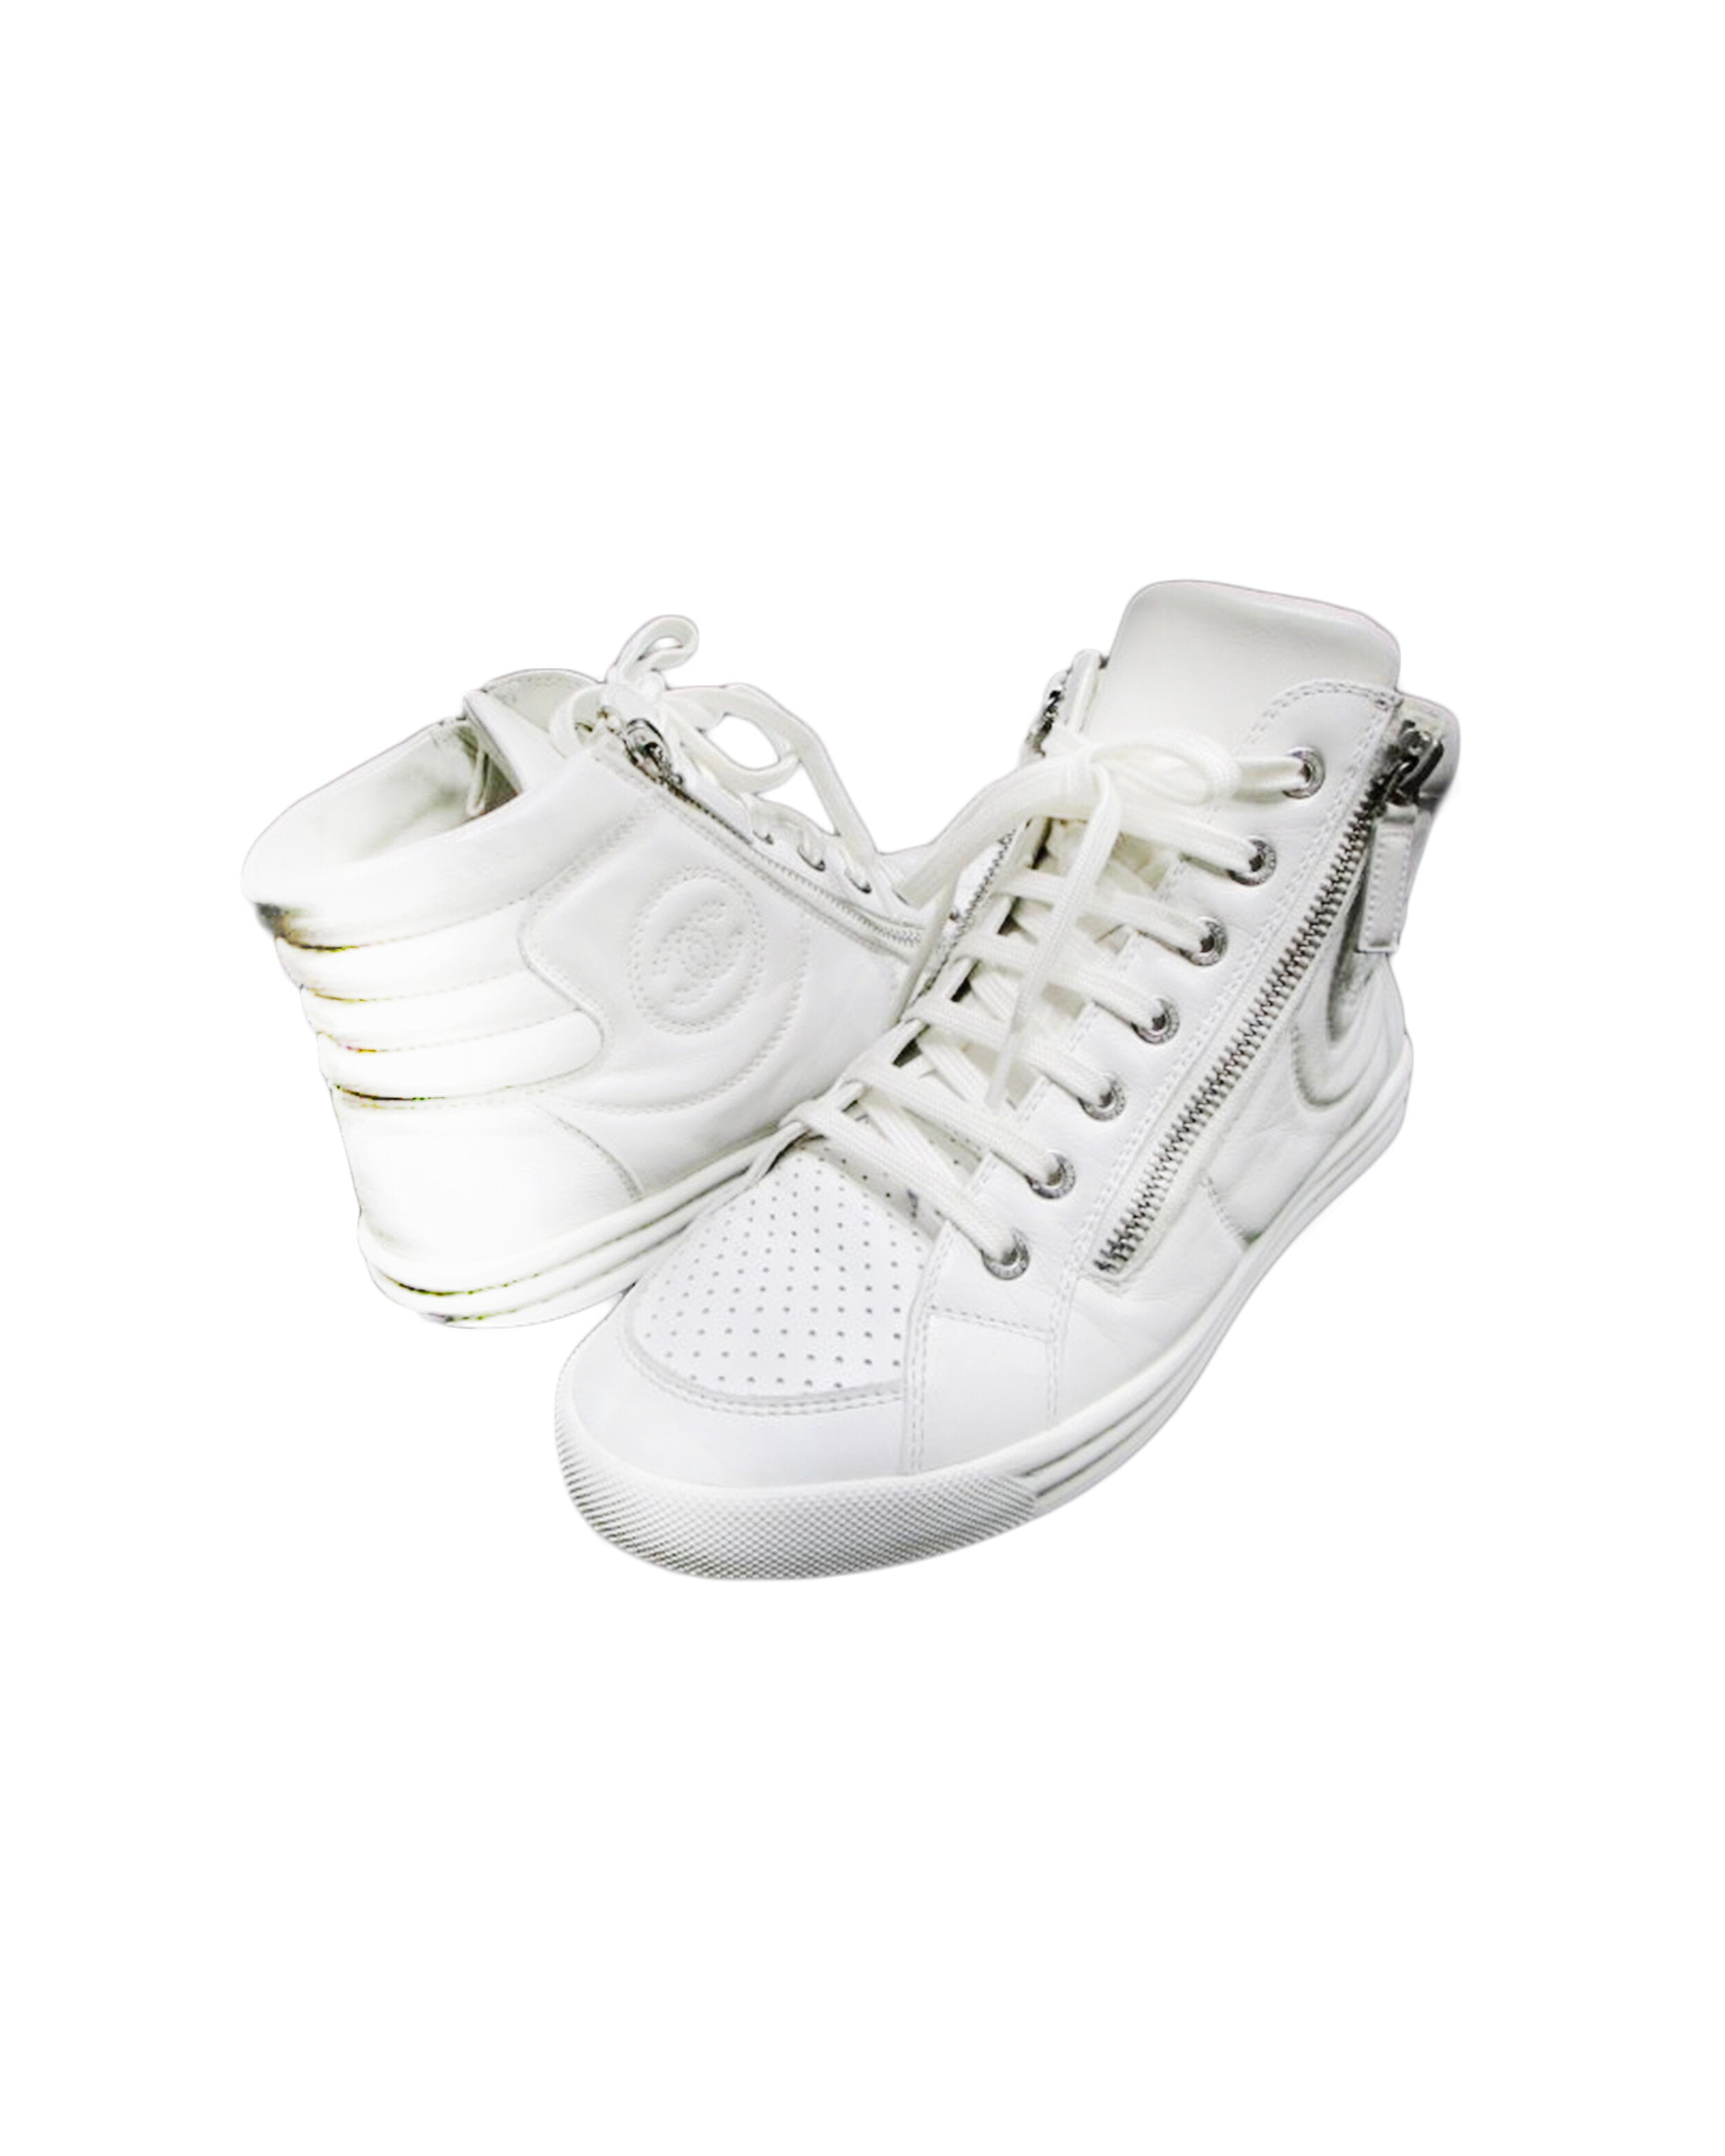 Chanel White High-Top Sneakers